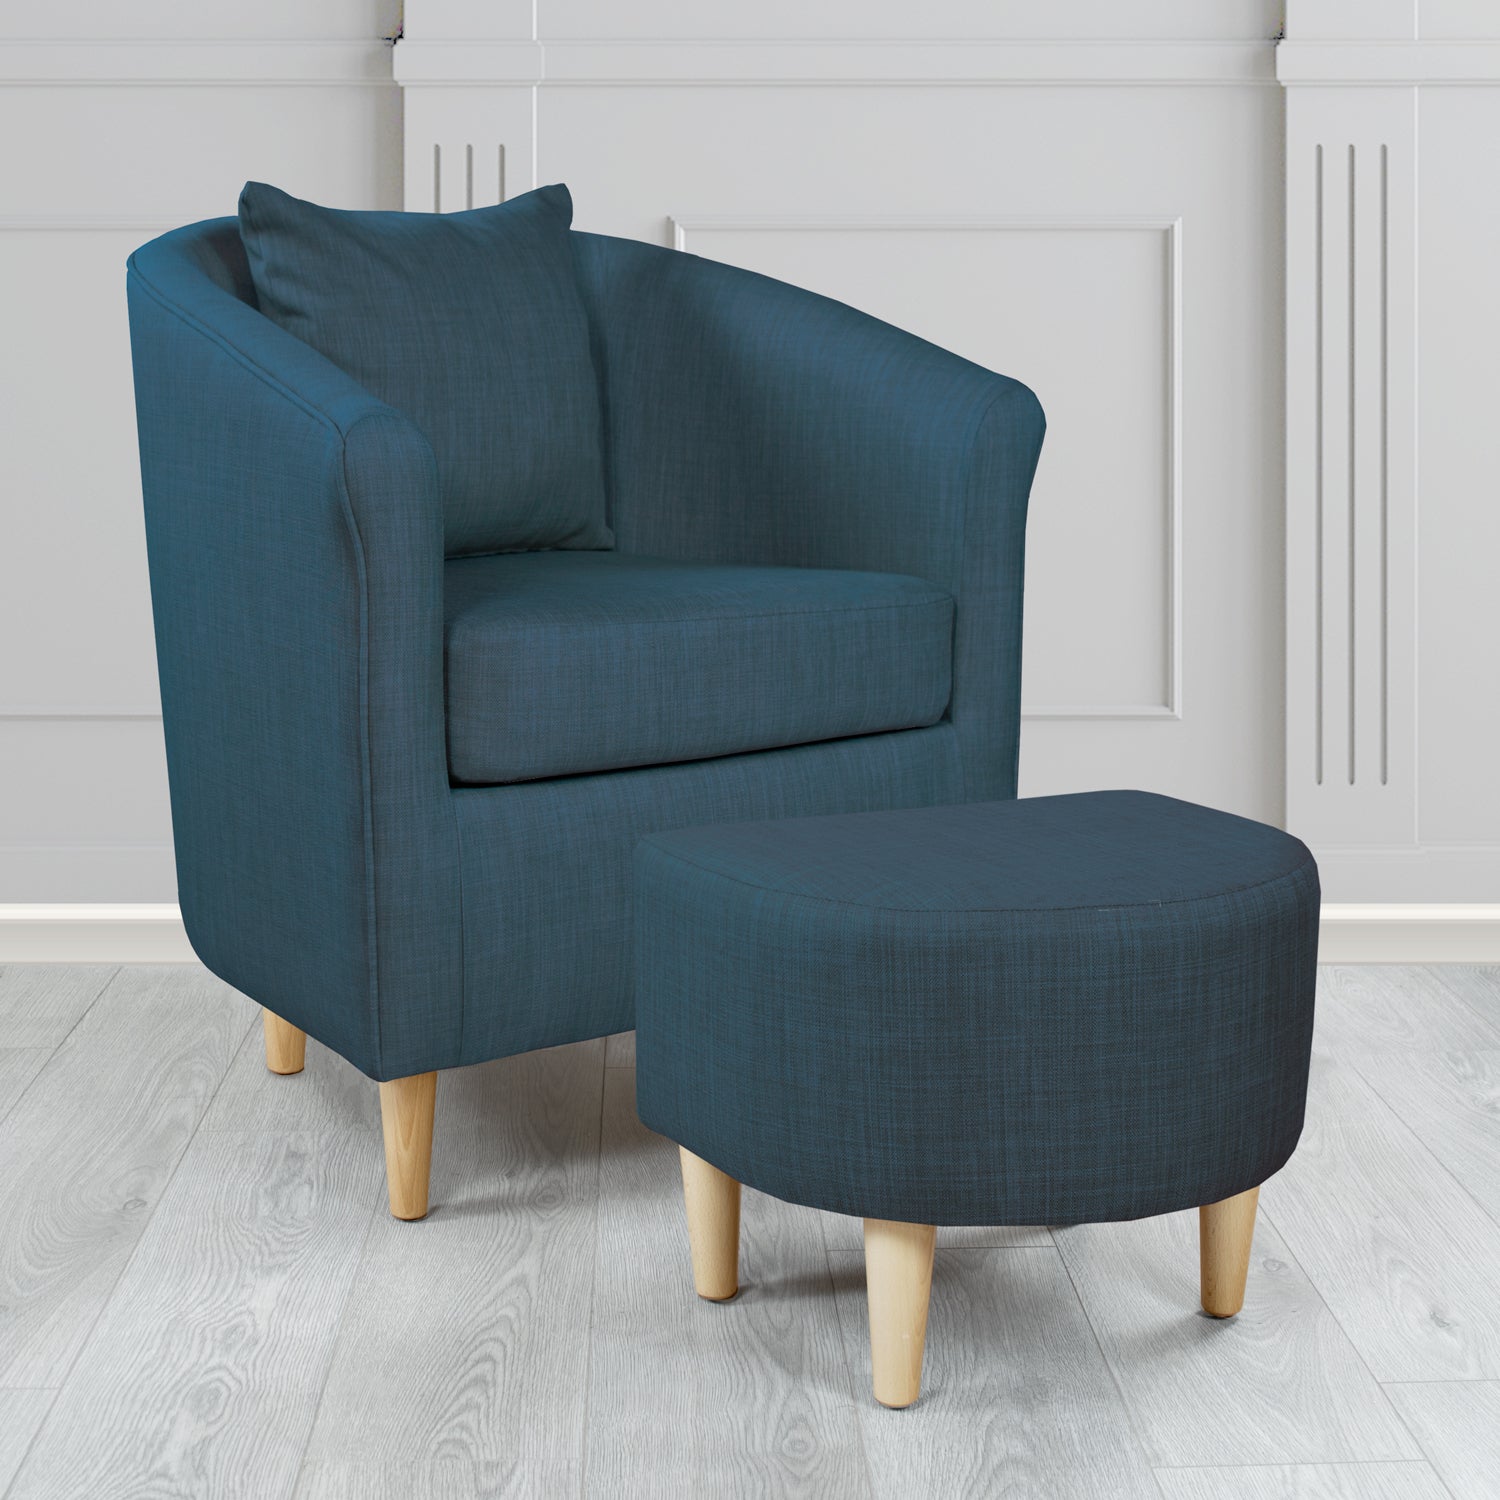 St Tropez Charles Midnight Plain Linen Fabric Tub Chair & Footstool Set with Scatter Cushion - The Tub Chair Shop